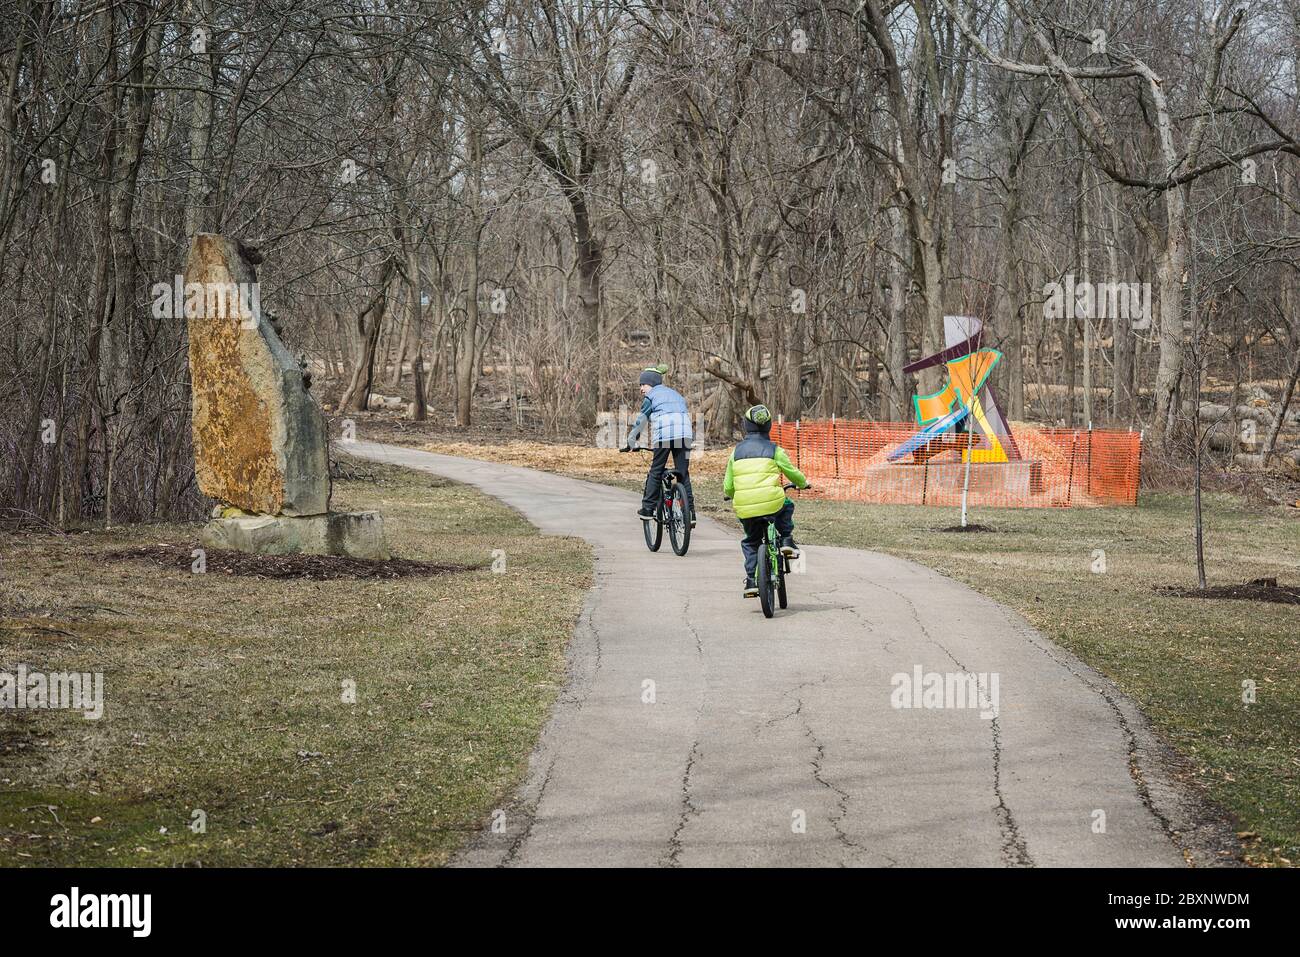 Schaumburg, Illinois USA - March 28, 2018 - The Chicago Athenaeum, International Sculpture Park, Two boys riding on bikes (for editorial use only) Stock Photo